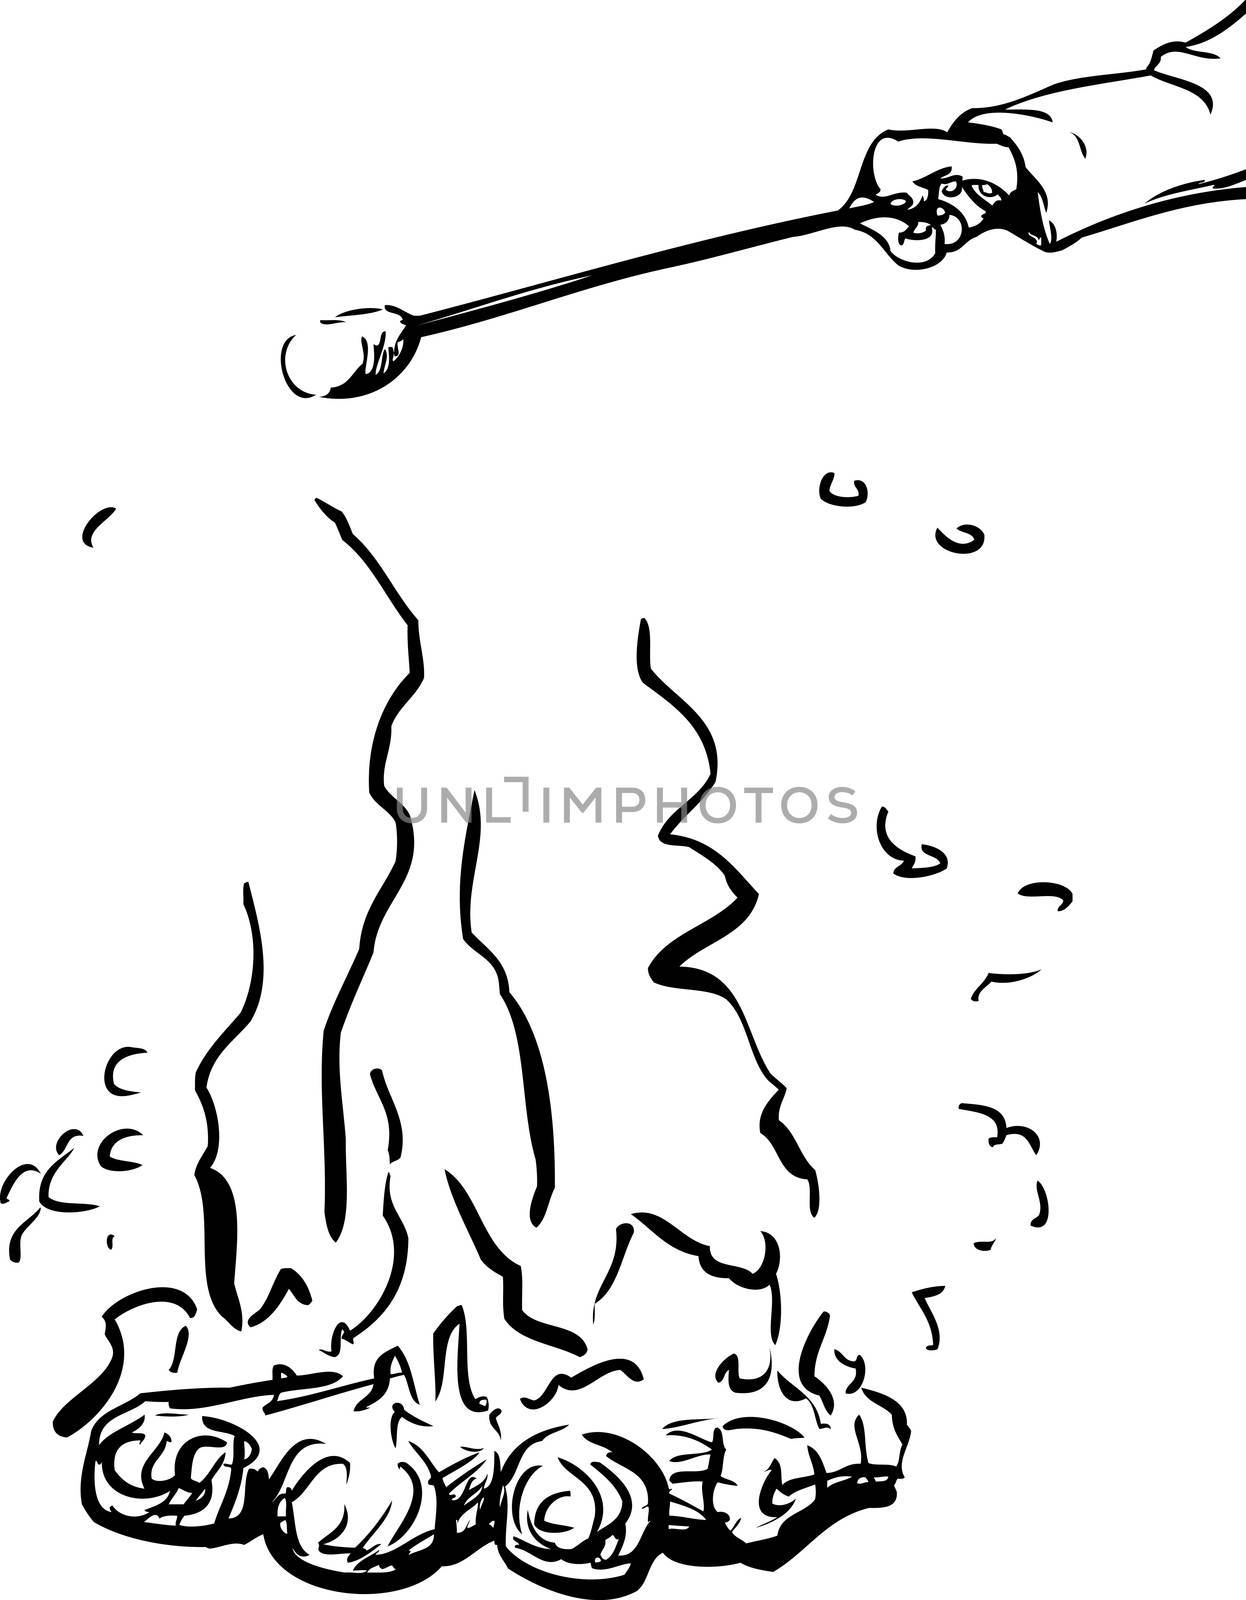 Outline sketch of roasting marshmallow over fire outline by TheBlackRhino